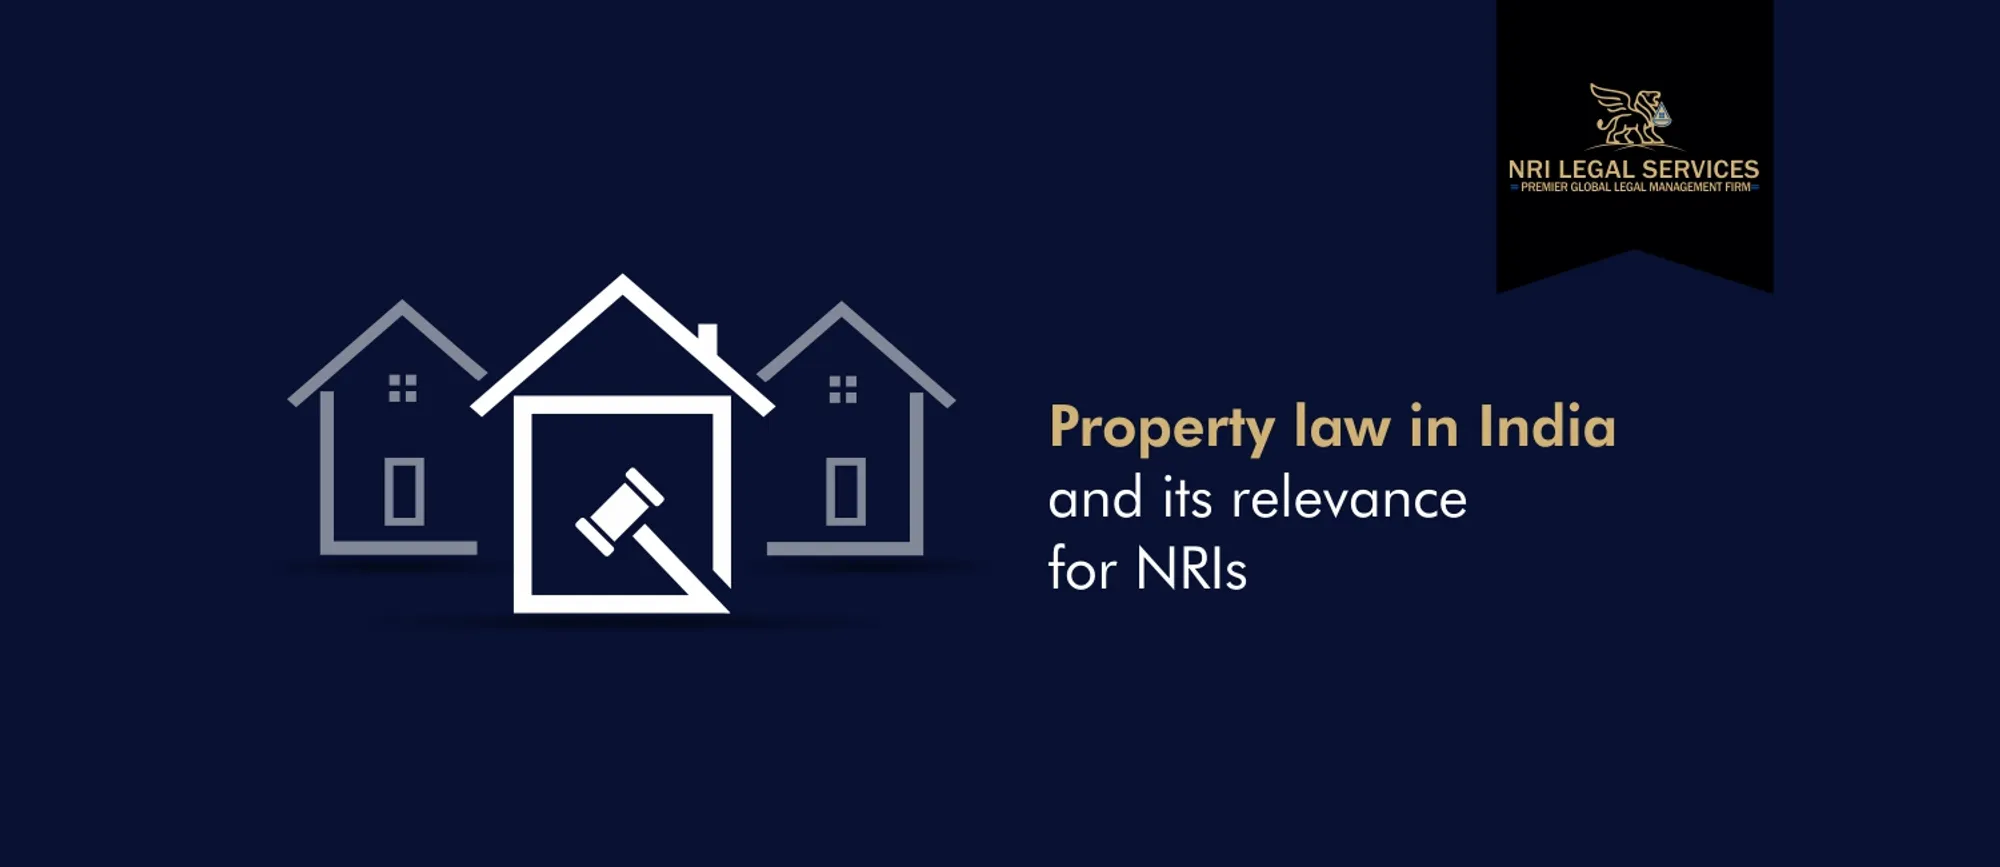 Property law in India and its relevance for NRIs